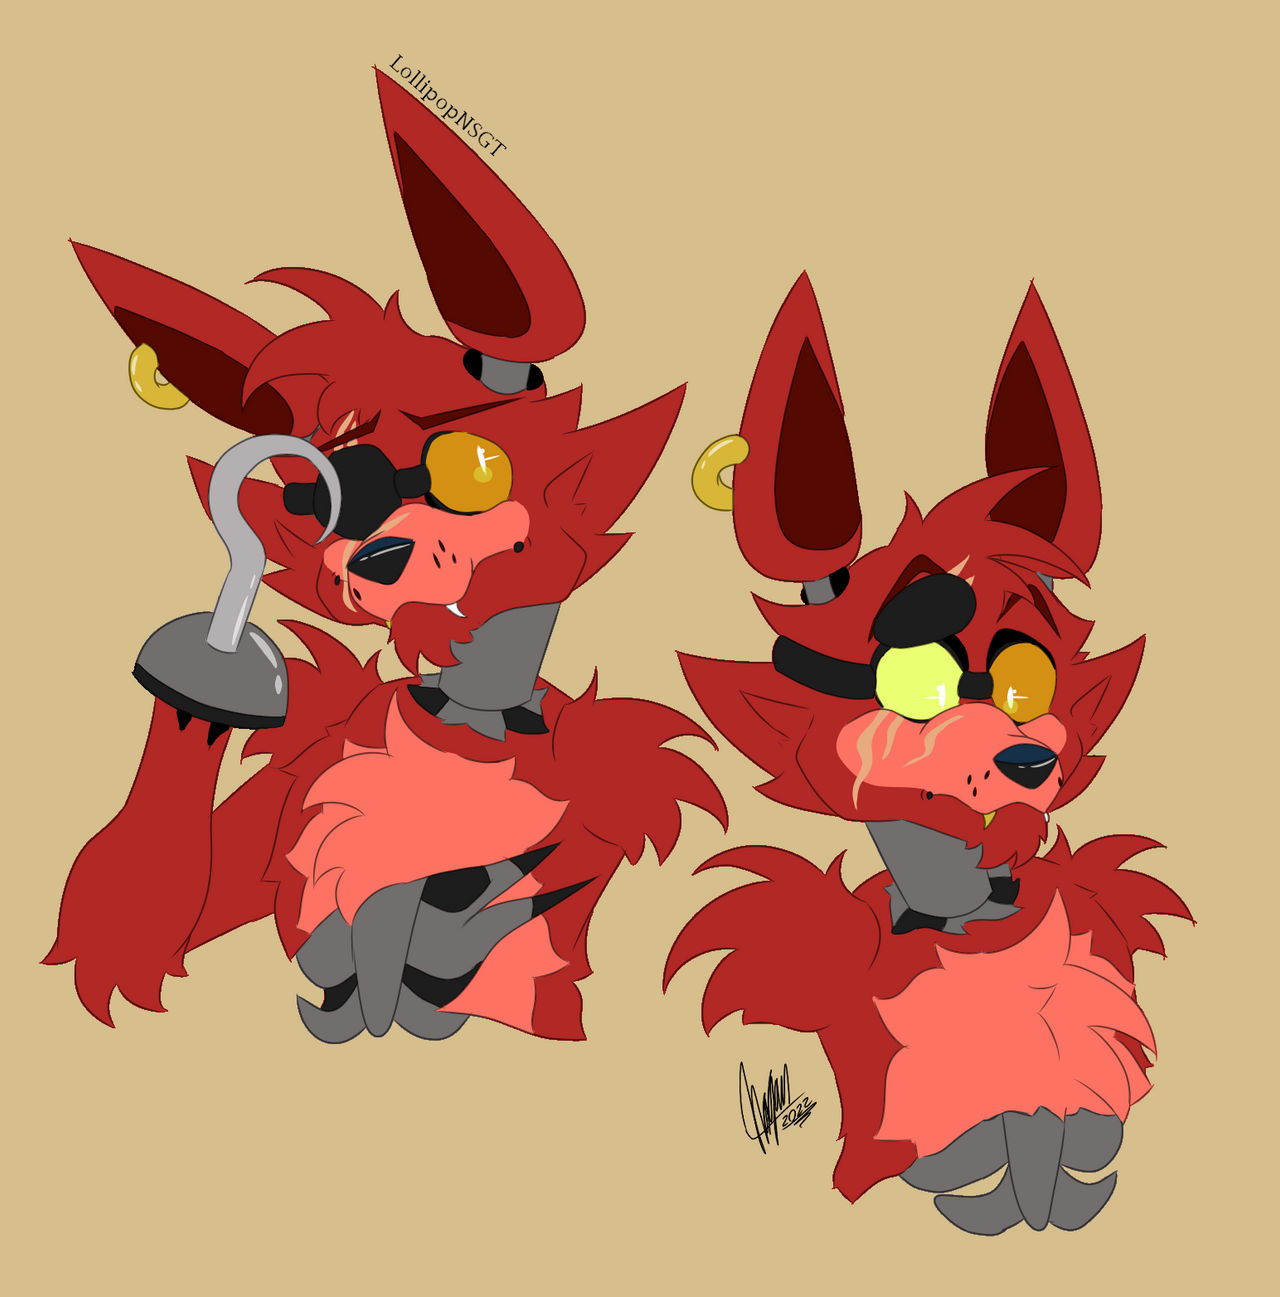 Withered Foxy by PazzArts on DeviantArt